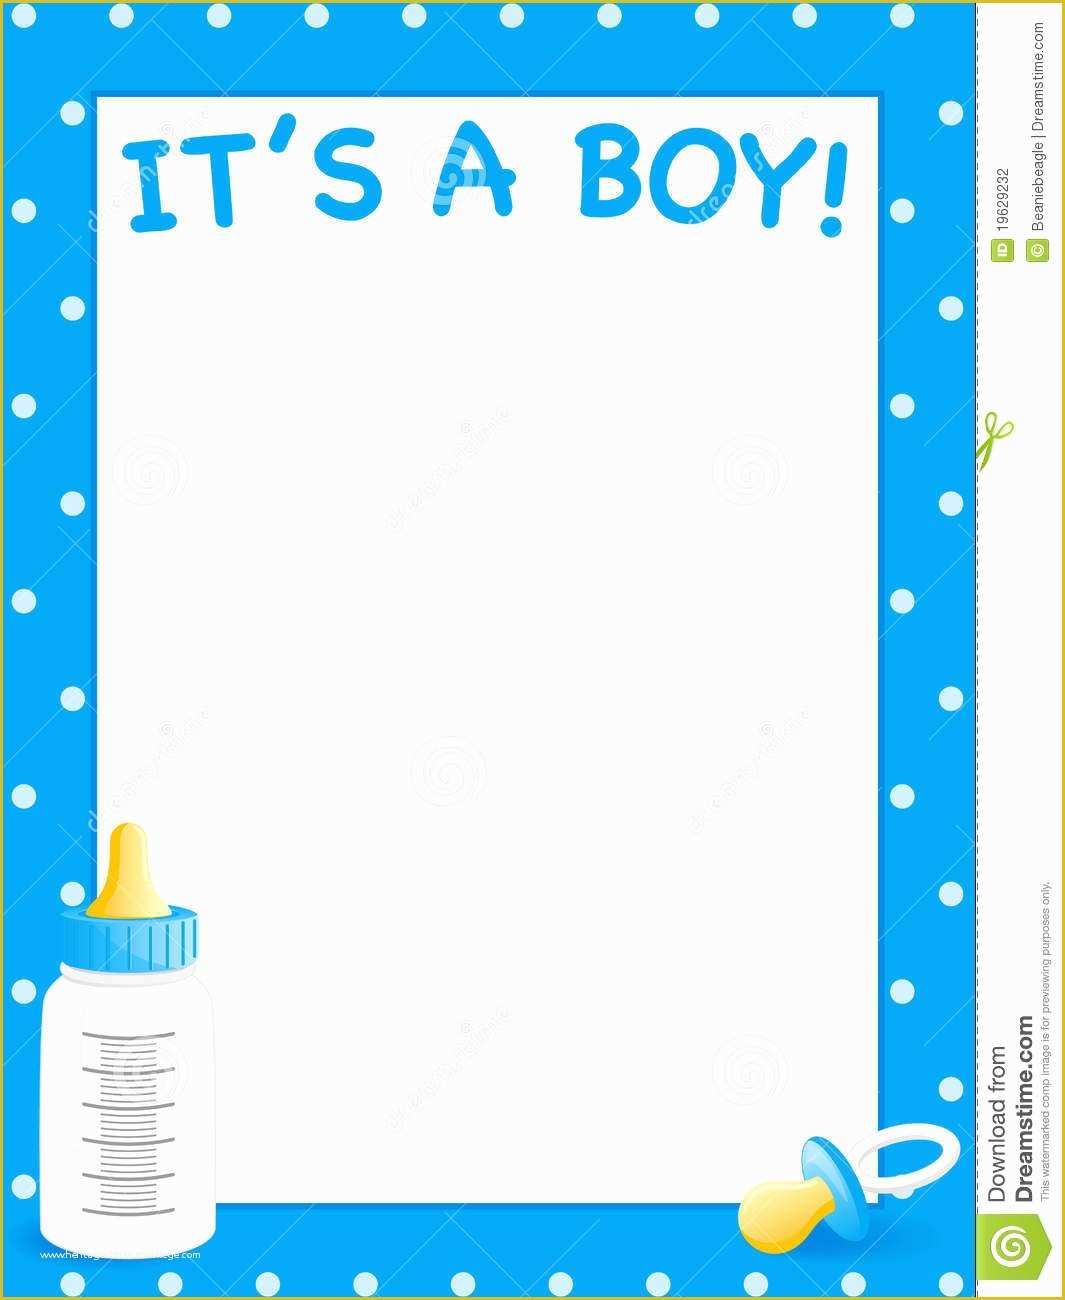 Free Printable Baby Shower Invitations Templates for Boys Of Free Baby Shower Invitations Templates for Boys